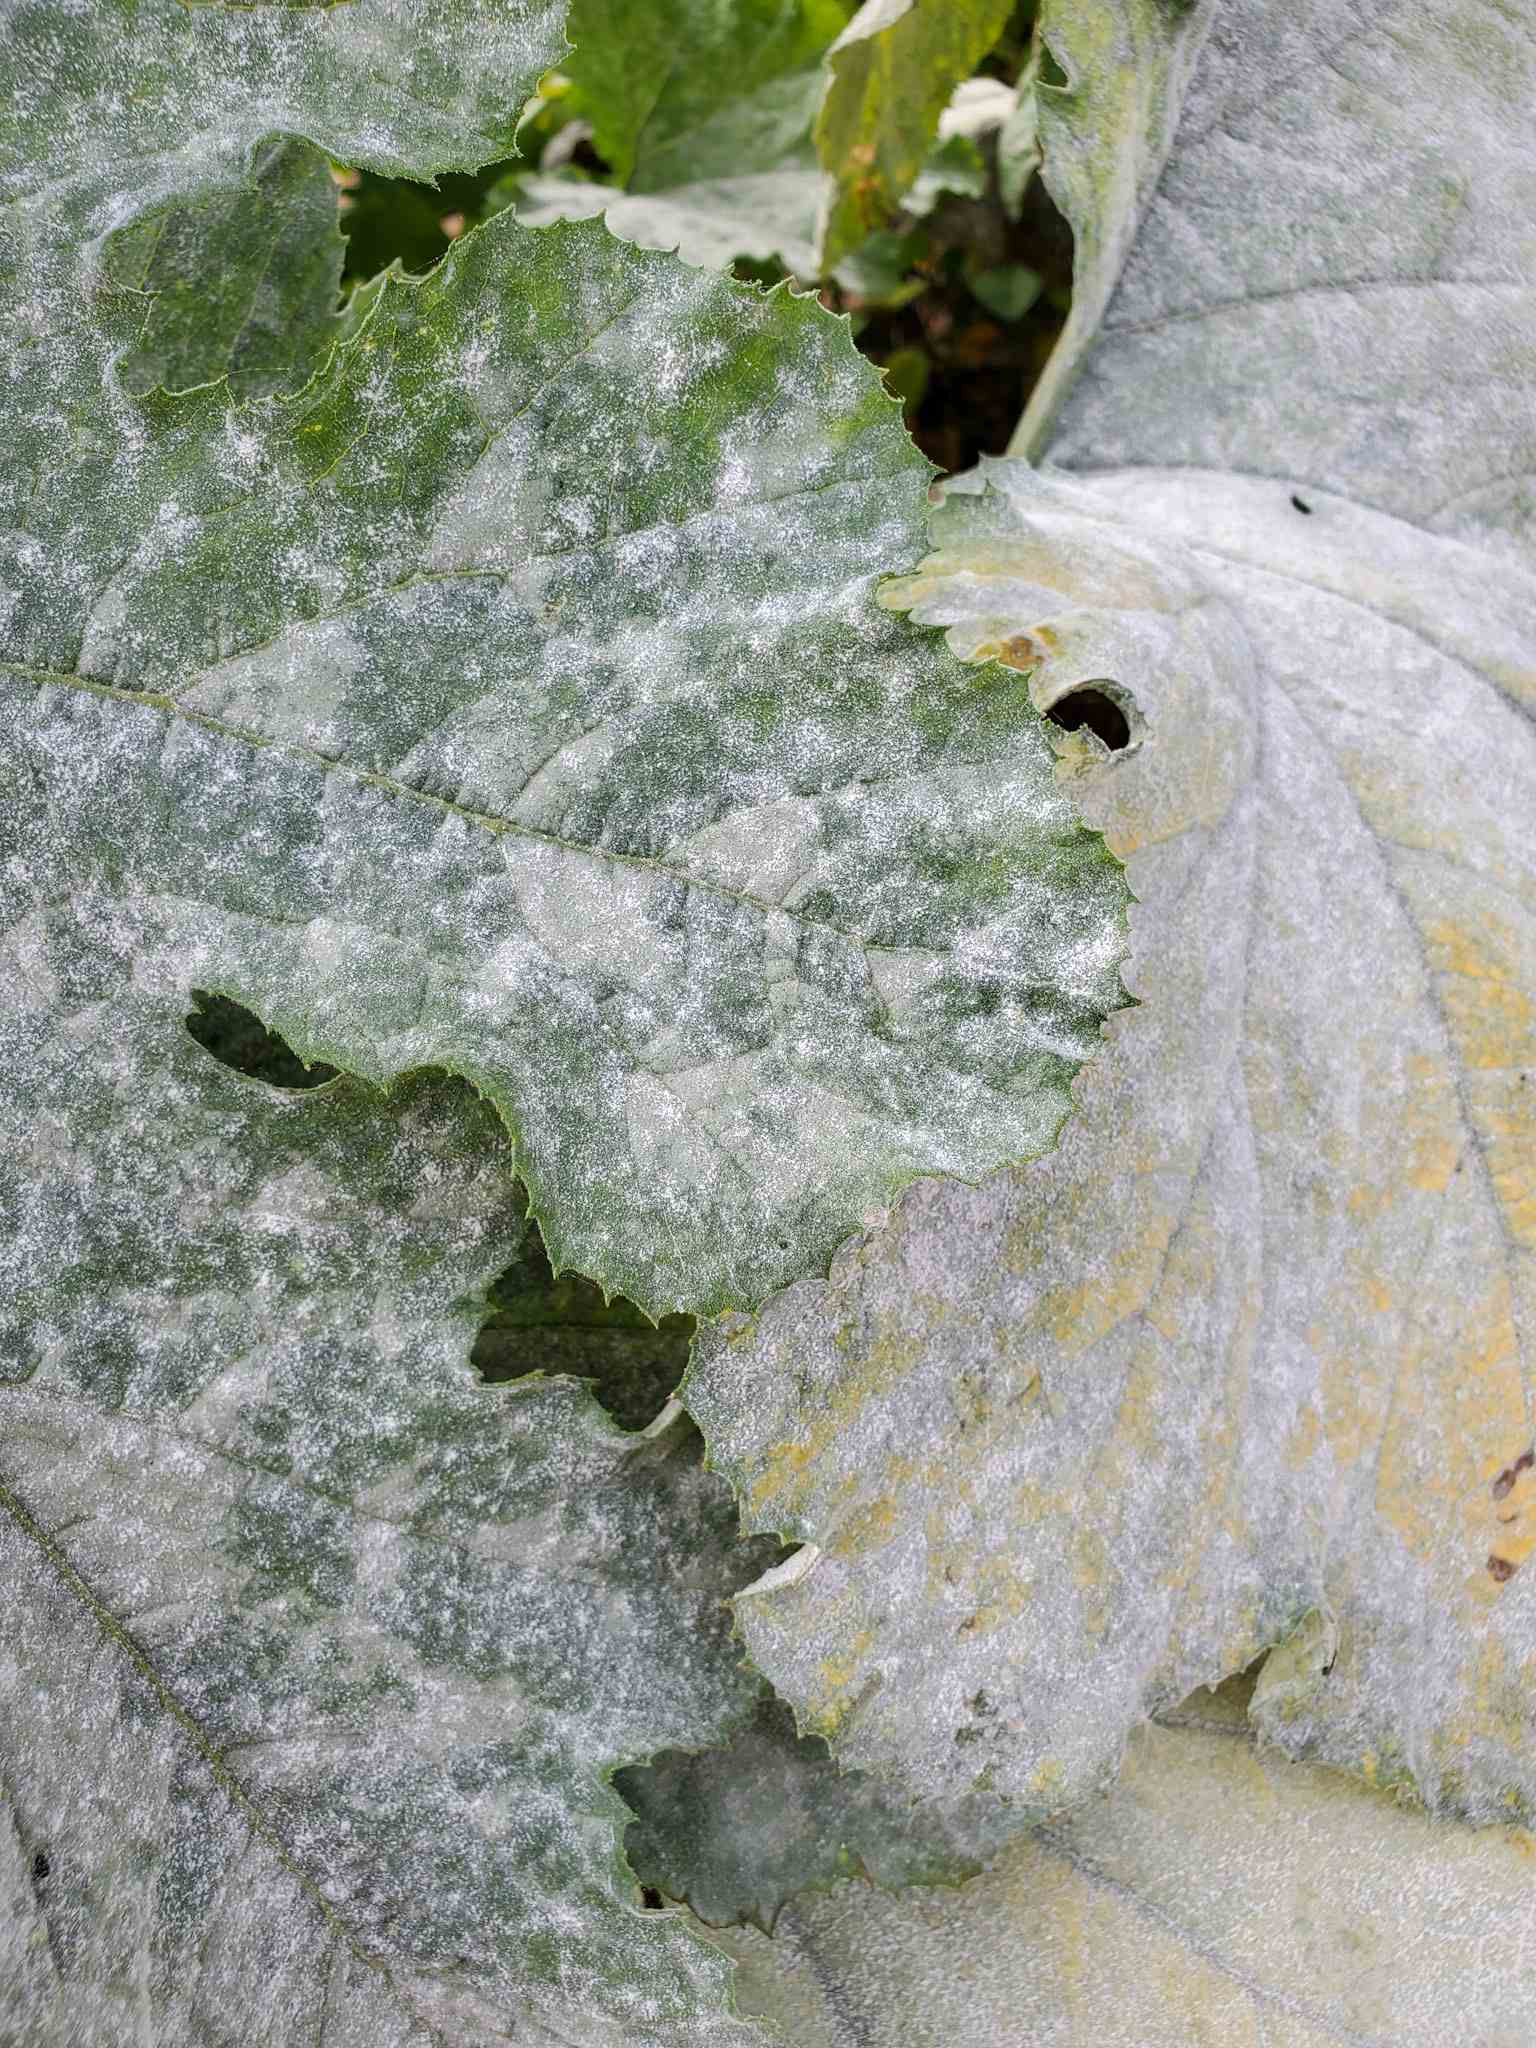 A close up image of a squash plant with a heavy infestation of powdery mildew. The leaves are caked with a  whitish silver coating that resemble spray paint.